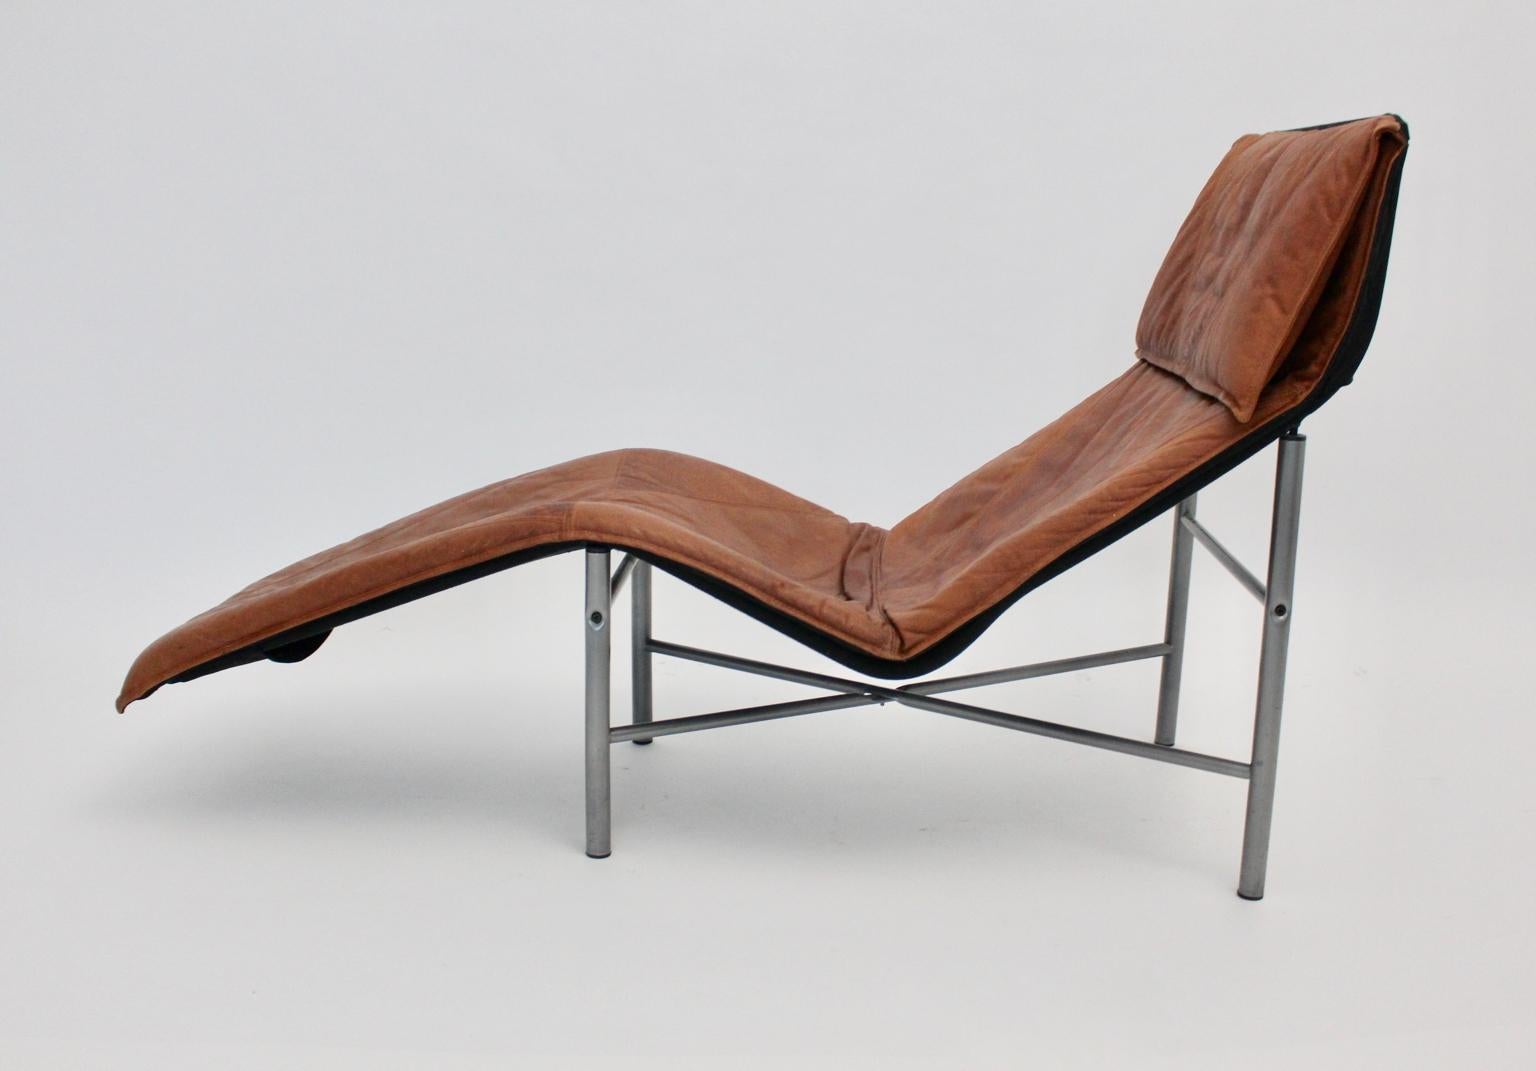 This vintage chaise longue by Tord Bjorklund, 1970 Sweden, combines comfort and timeless design.
The upholstery of the chaise longue was covered with cognac leather and shows a great leather patina.
Also the base was made of grey lacquered tube